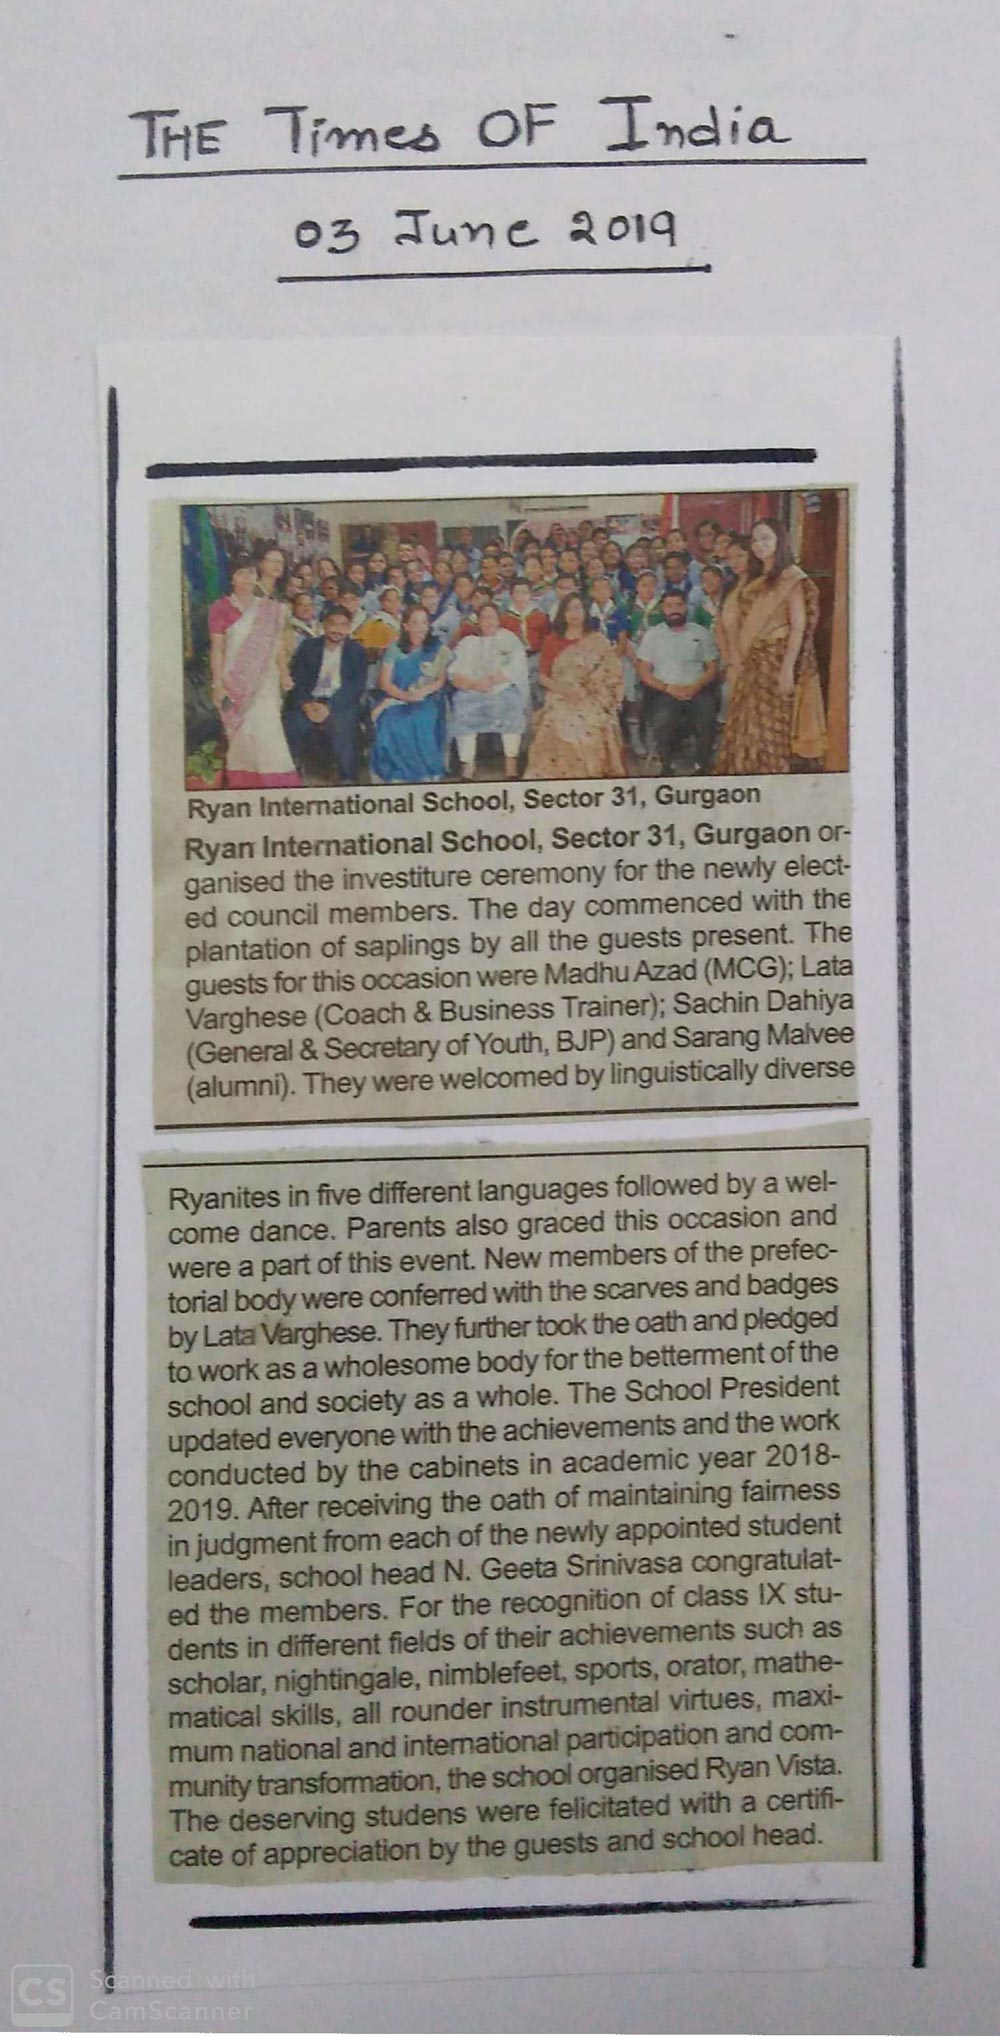 Organised the investiture ceremony for all the newly elected council members - Ryan International School, Sec 31 Gurgaon - Ryan Group